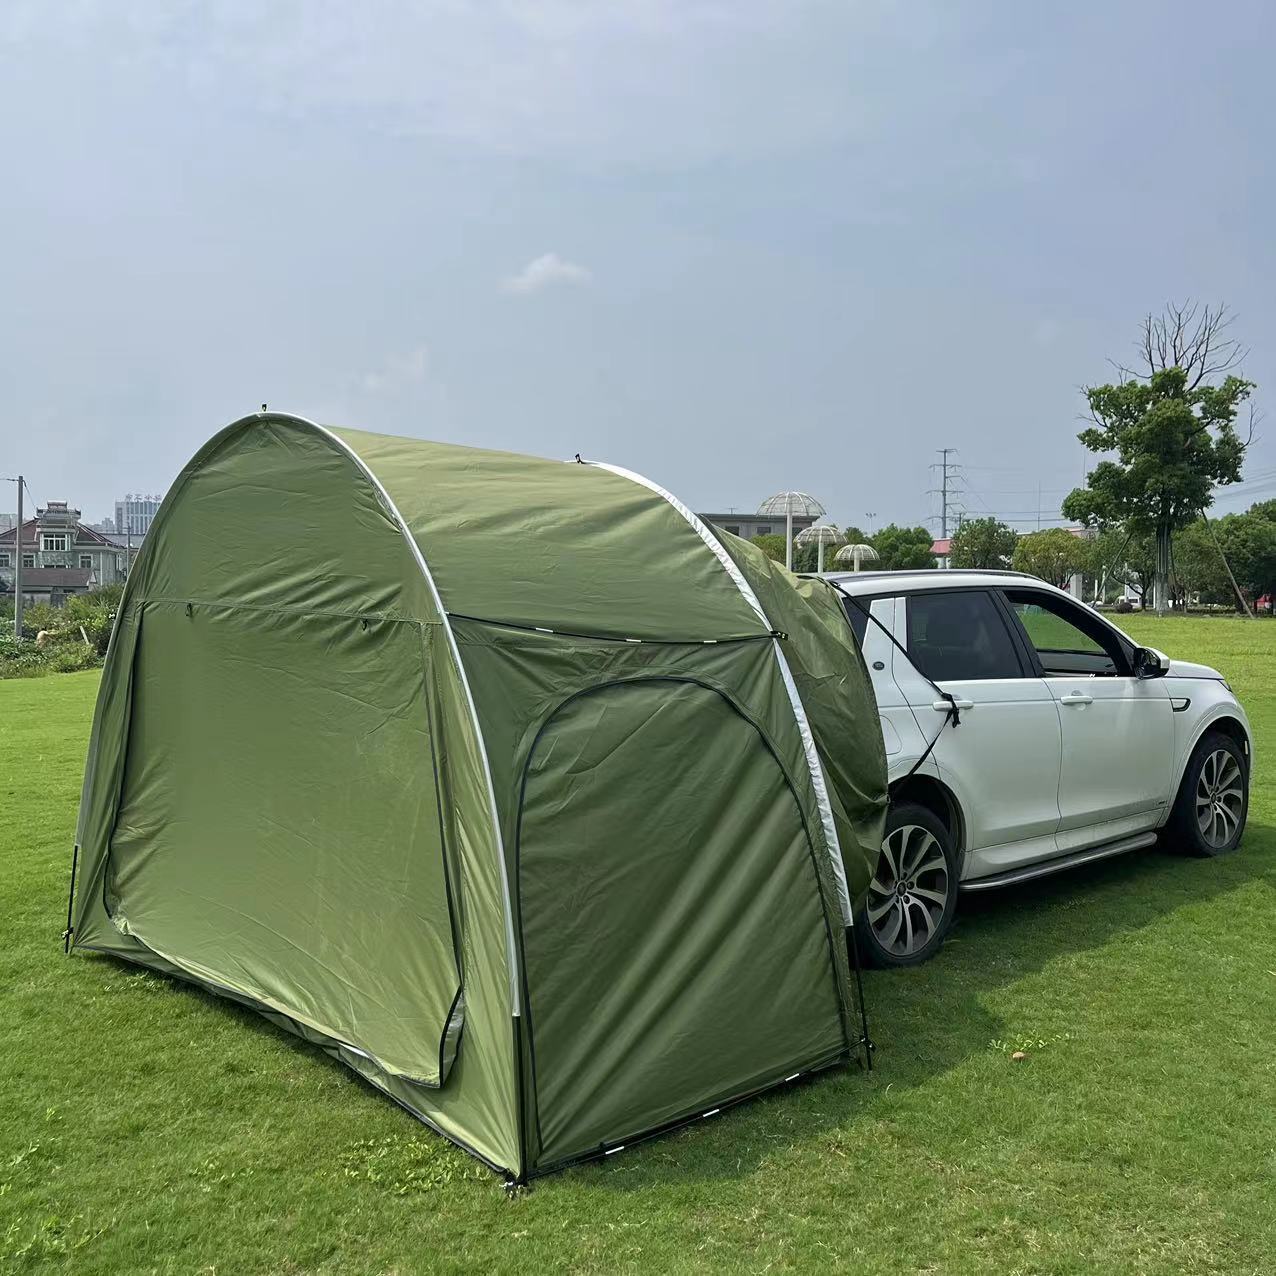 

Outdoor Camping Car Tail Tent - Quick Open, Waterproof, Sunshade, Rainproof, Portable With Zipper Closure For Courtyard & Wilderness Shelter